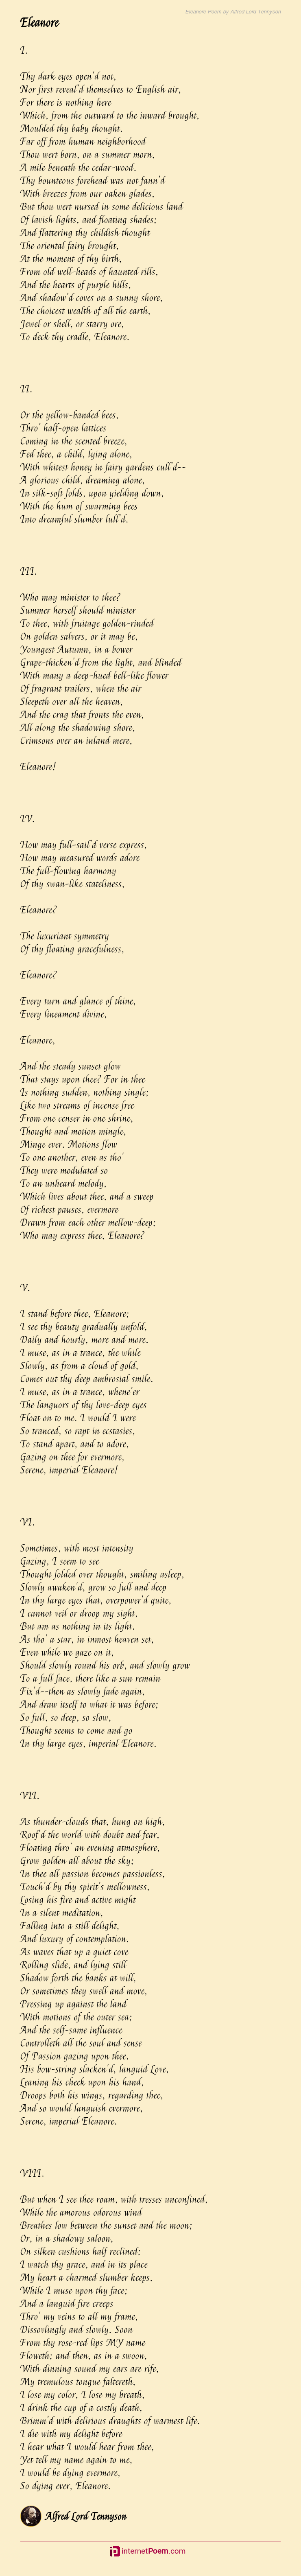 Eleanore Poem by Alfred Lord Tennyson